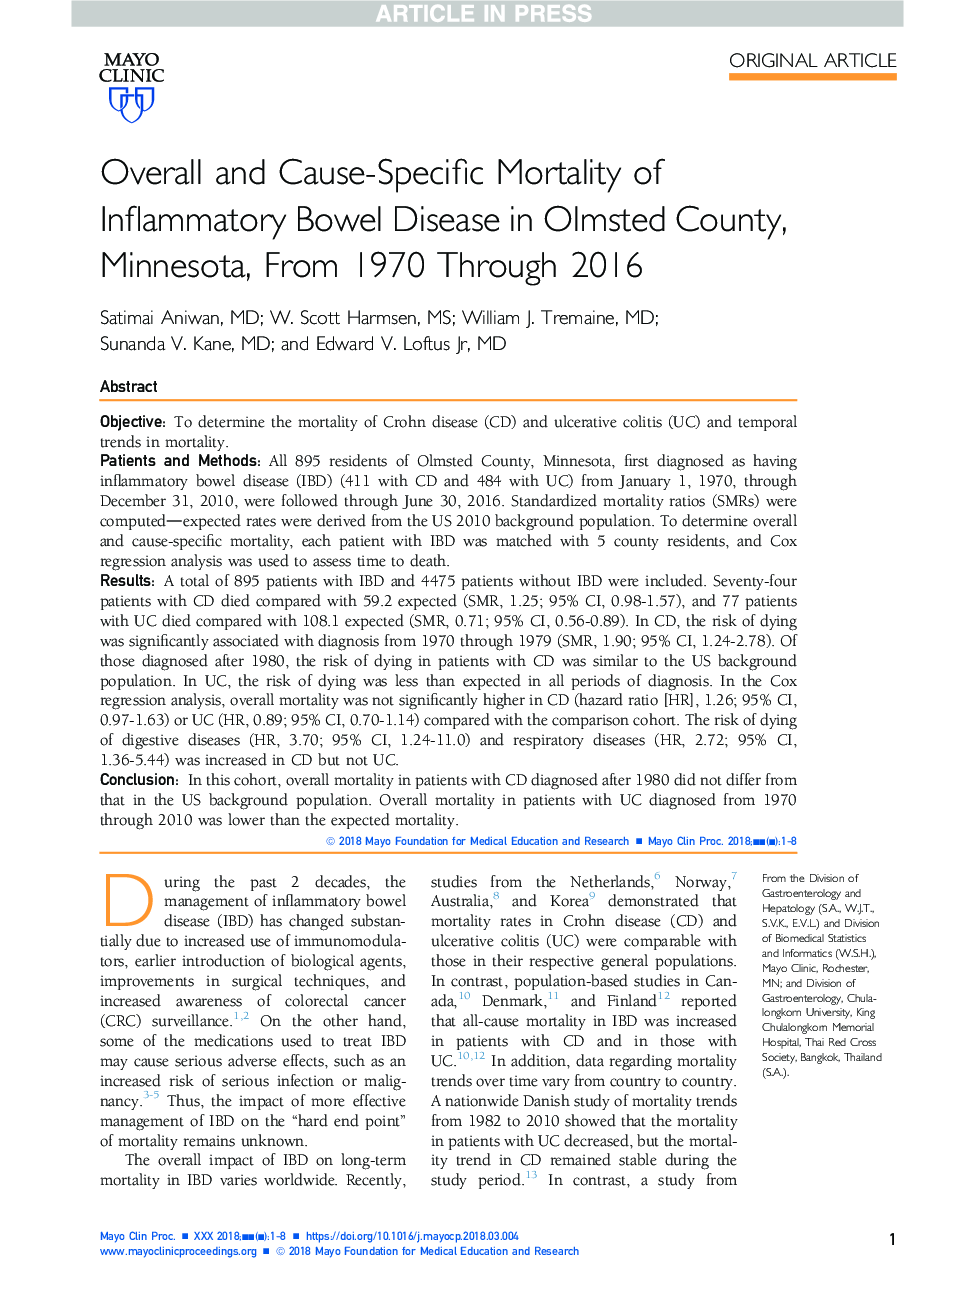 Overall and Cause-Specific Mortality of Inflammatory Bowel Disease in Olmsted County, Minnesota, From 1970 Through 2016